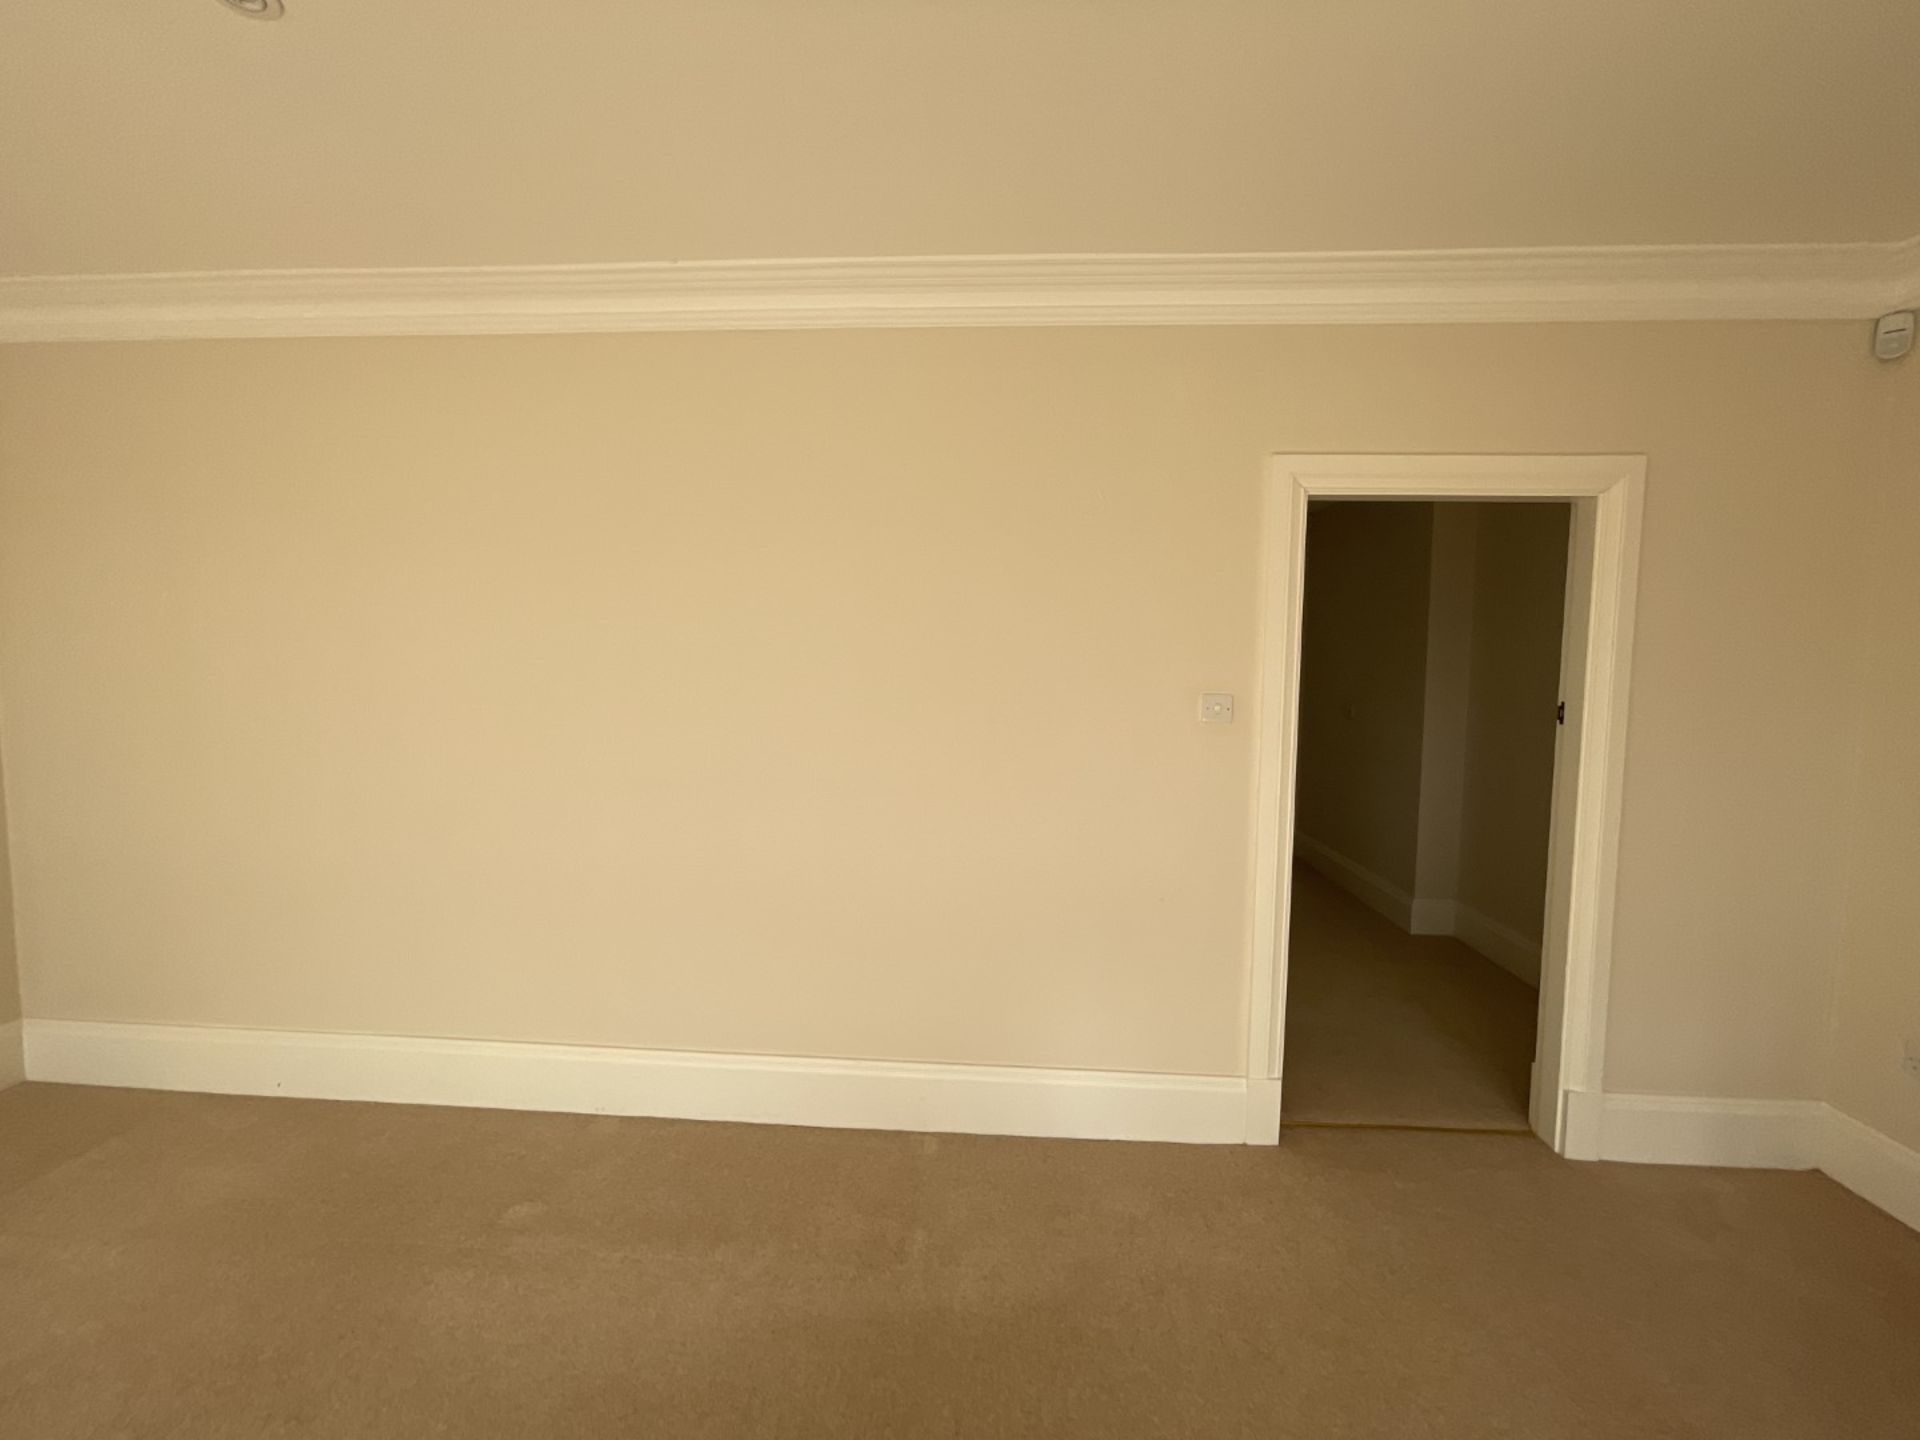 22-Metres of Painted Timber Wooden Skirting Boards, in White - Ref: PAN244 / Bed 2 - CL896 - NO - Image 5 of 6